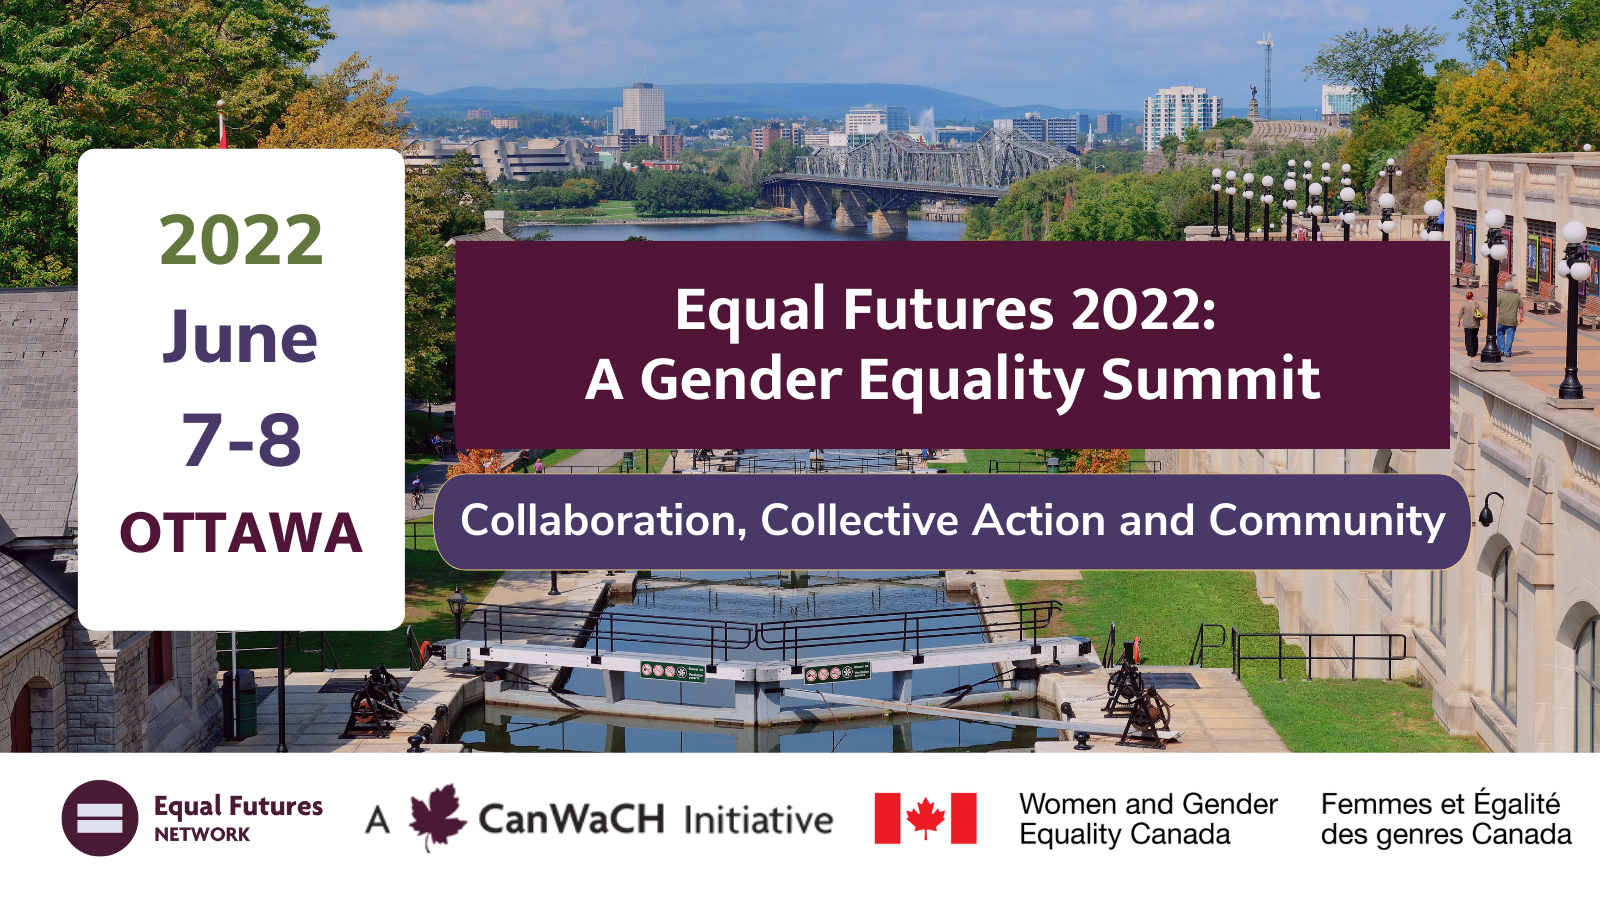 Gender Equality Summit Coming to Ottawa in June 2022